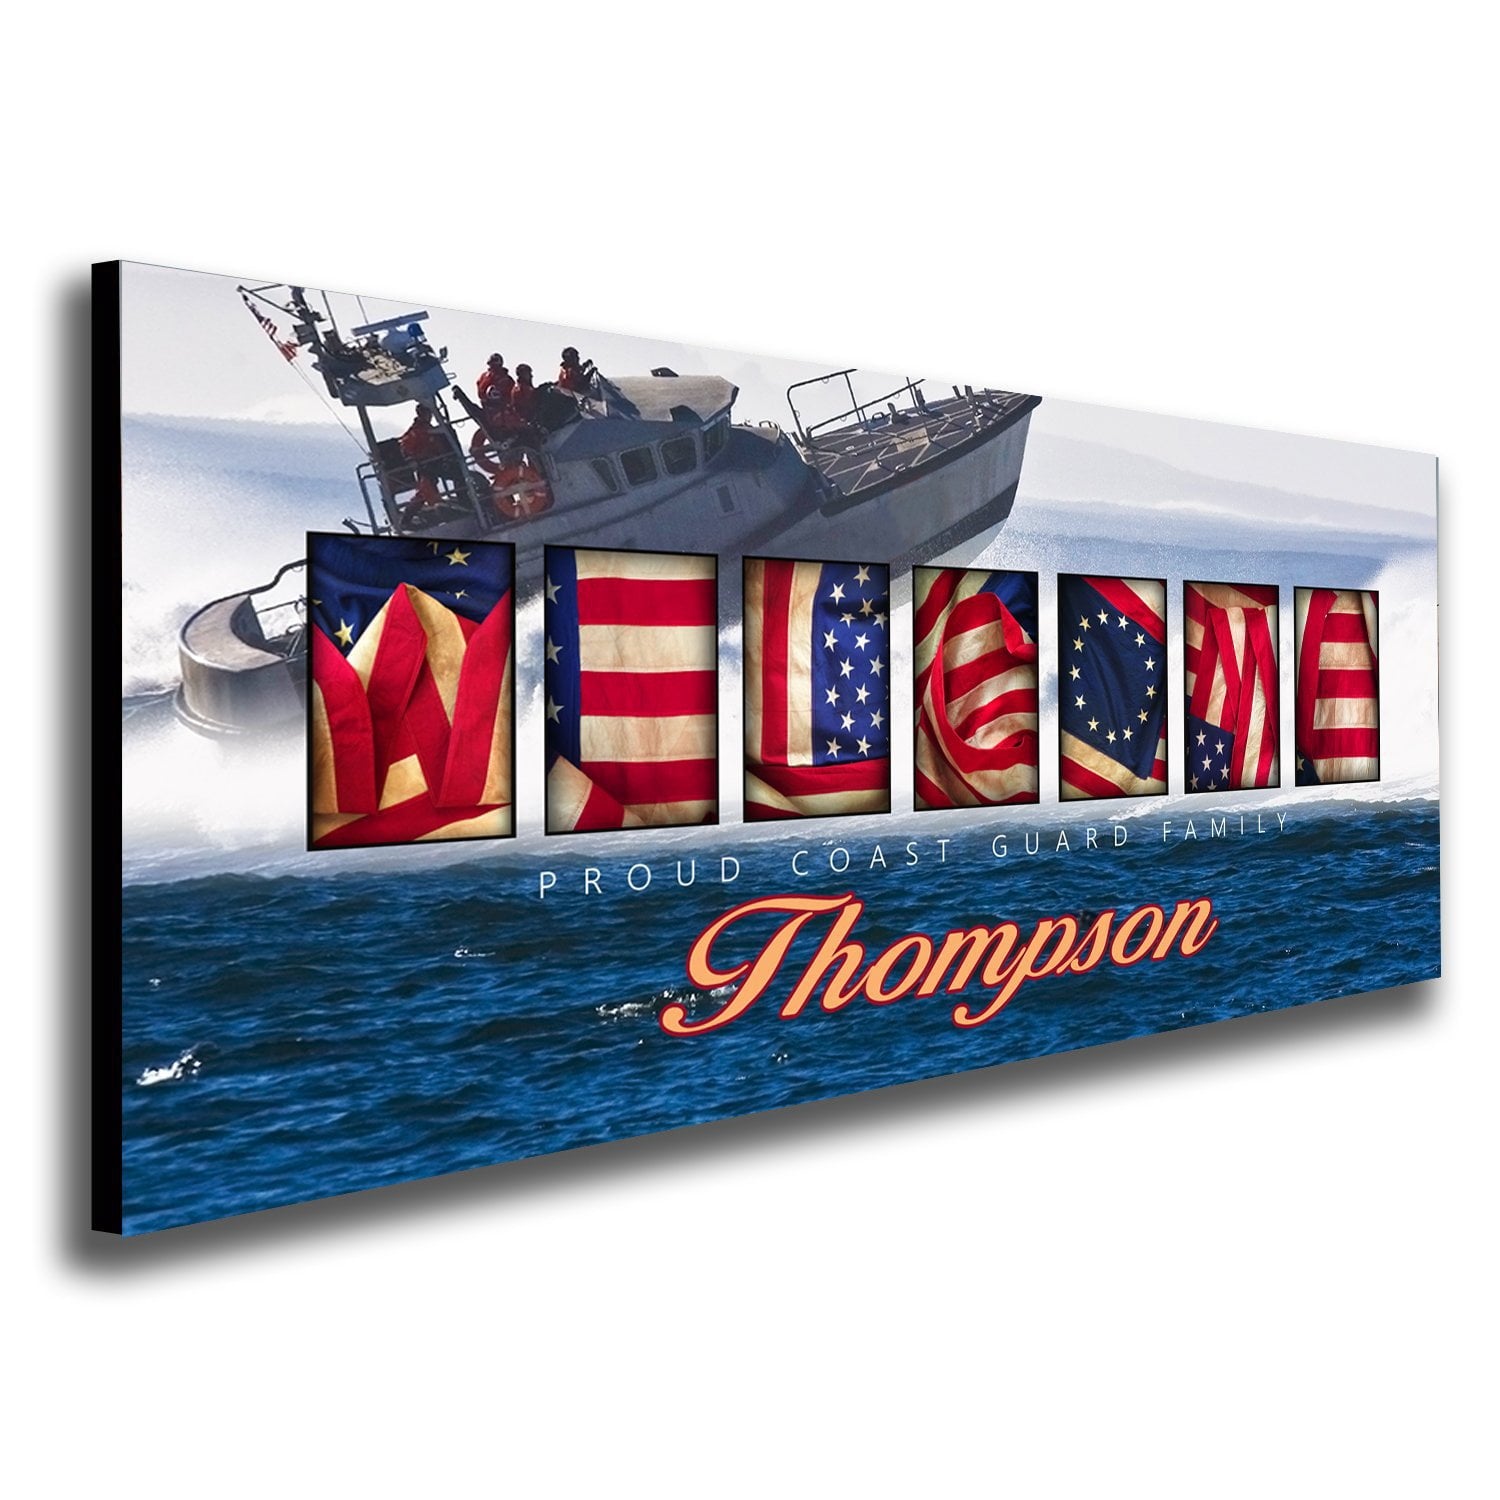 Coast Guard art using the American flag to spell the word "Welcome" and a ship in the ocean - Personal-Prints